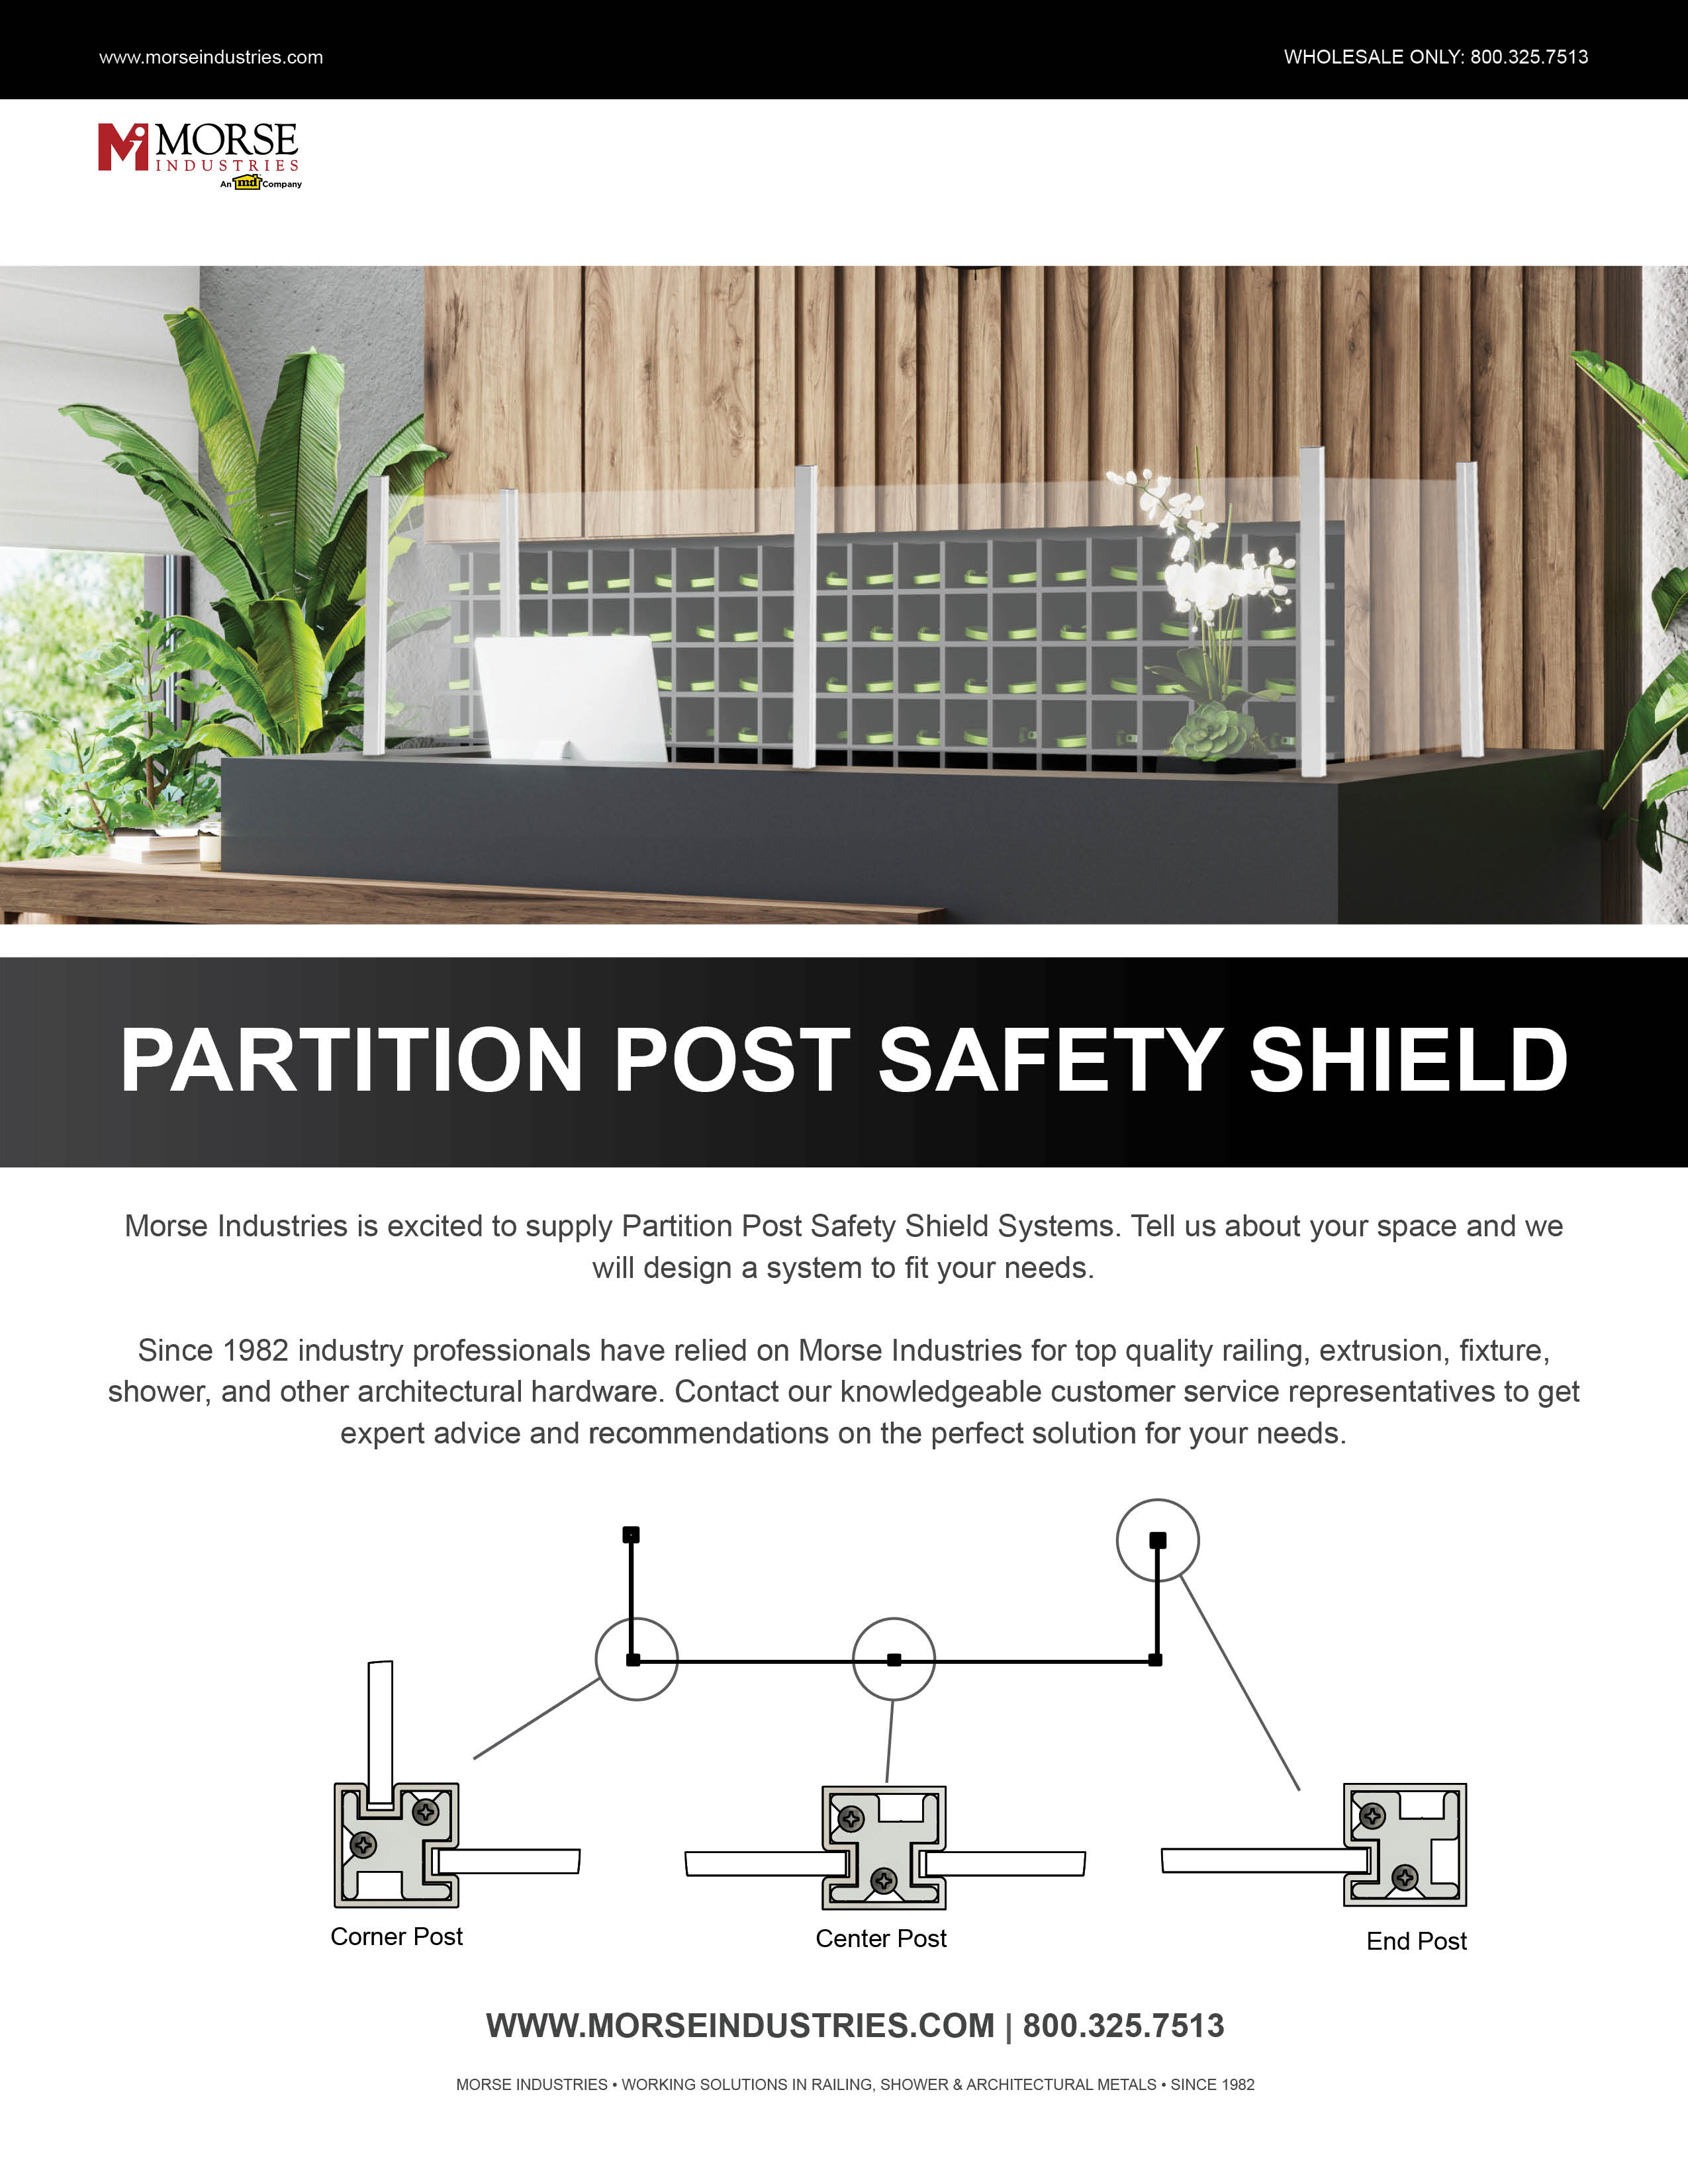 Partition Post Safety Shield